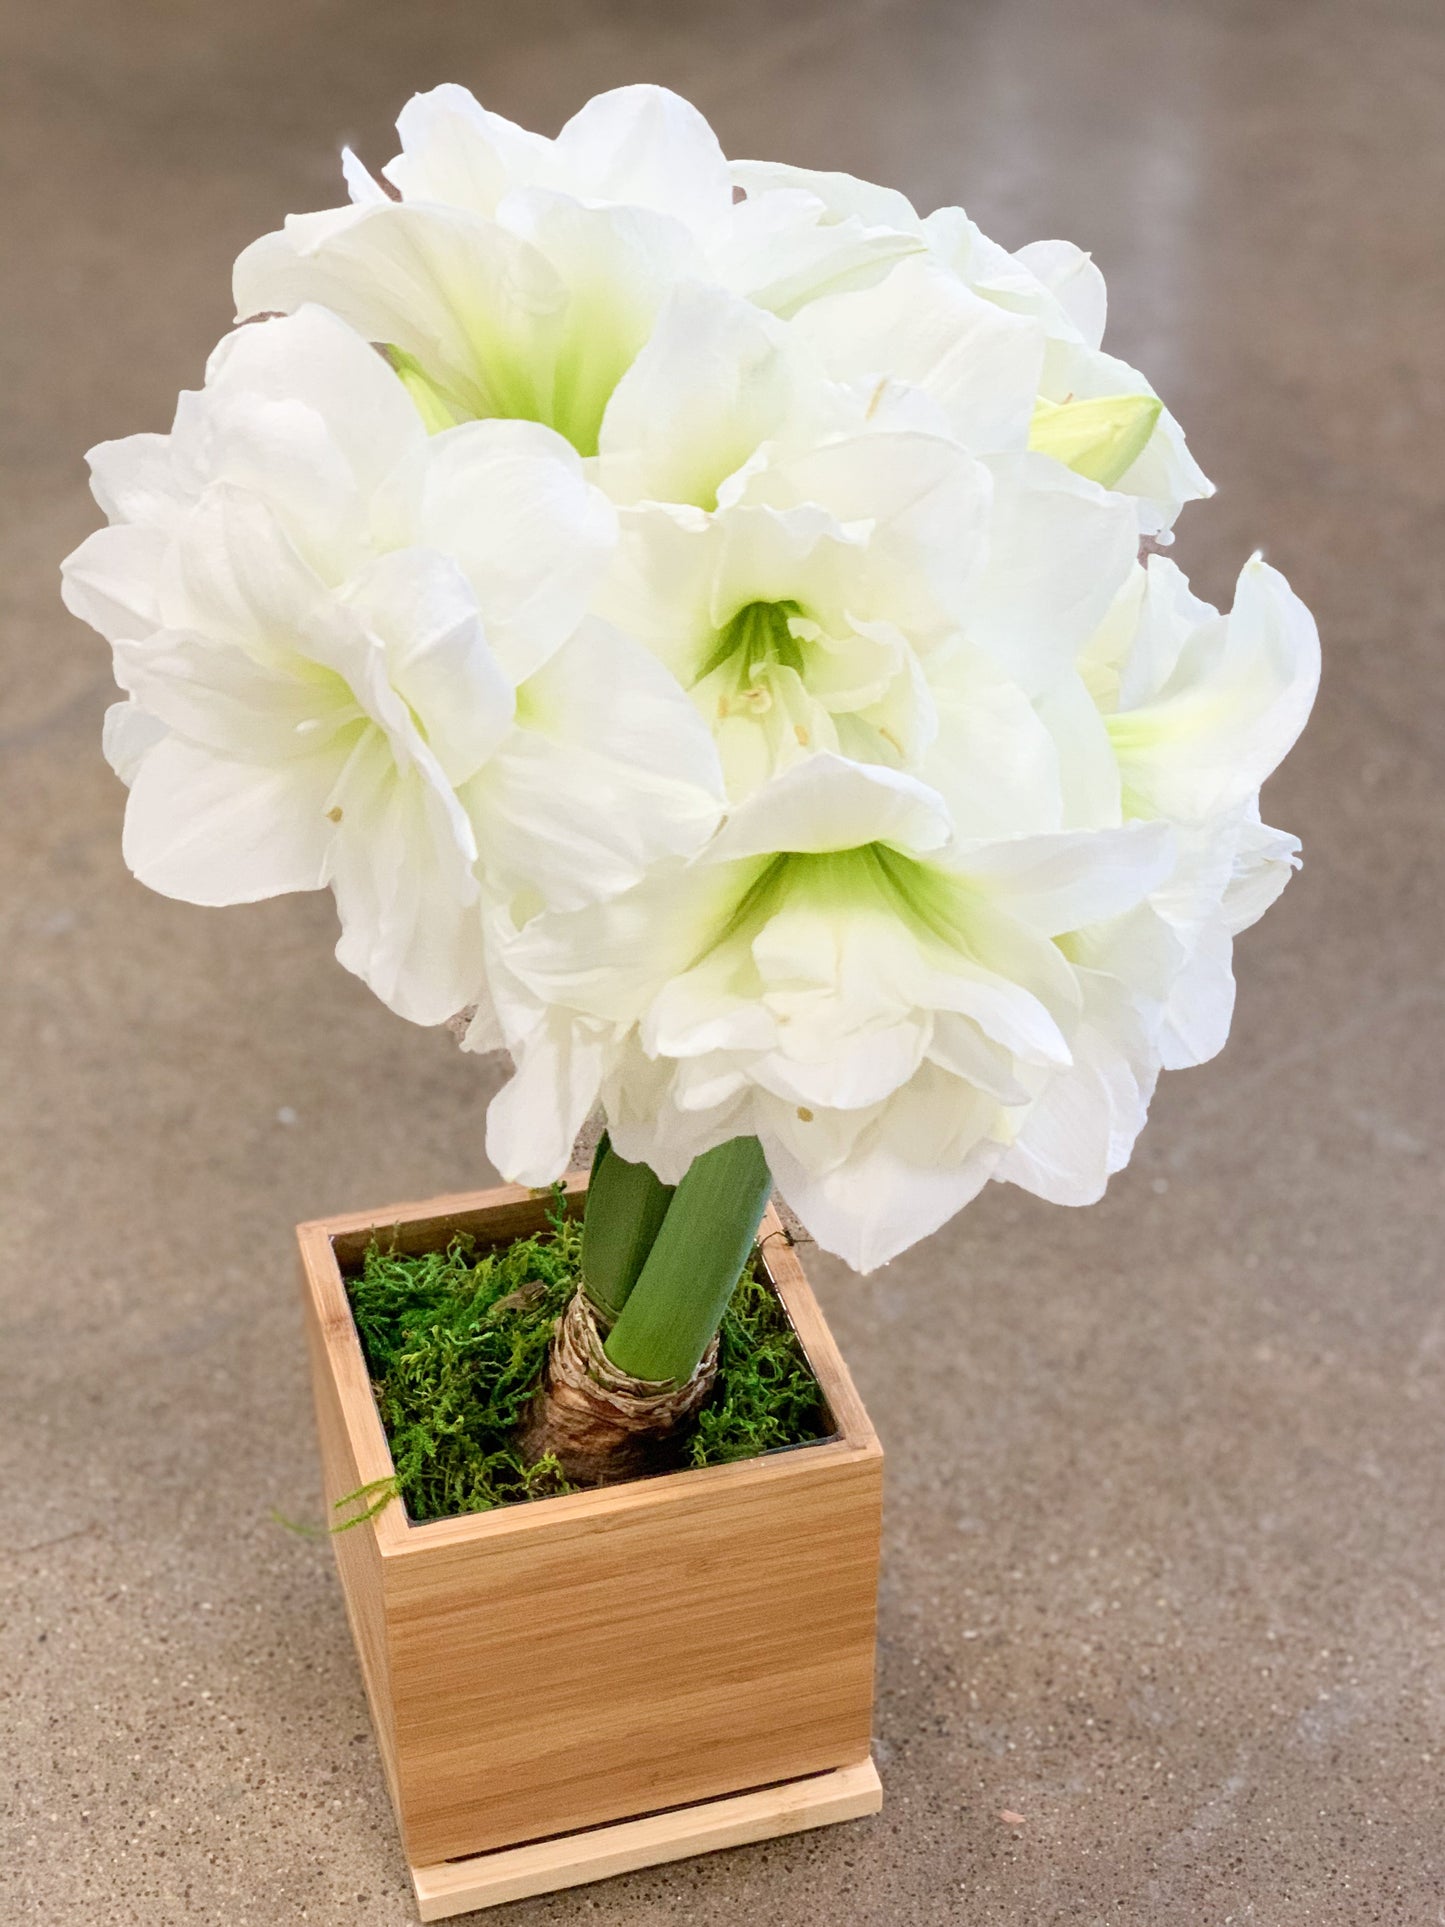 Double Blooming Alfresco Amaryllis in Bamboo Planter